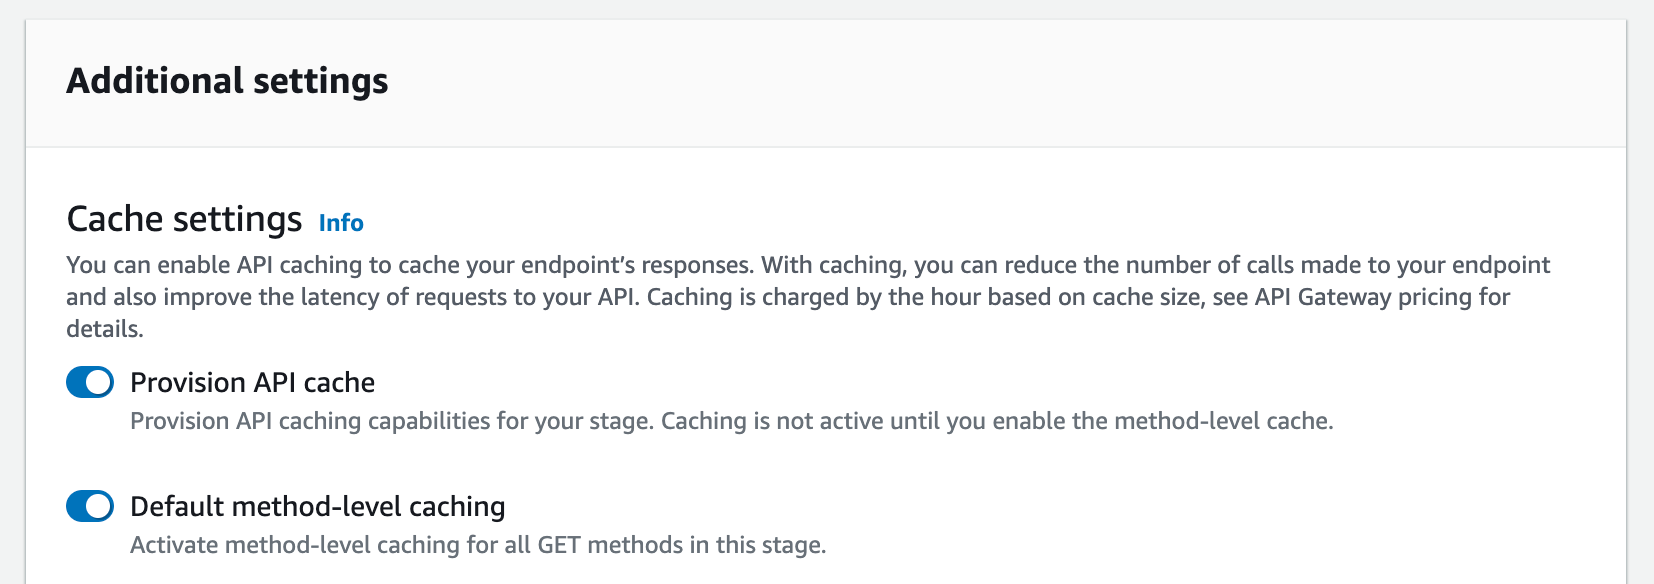 
            Turn on provision API cache and default method-level caching.
          